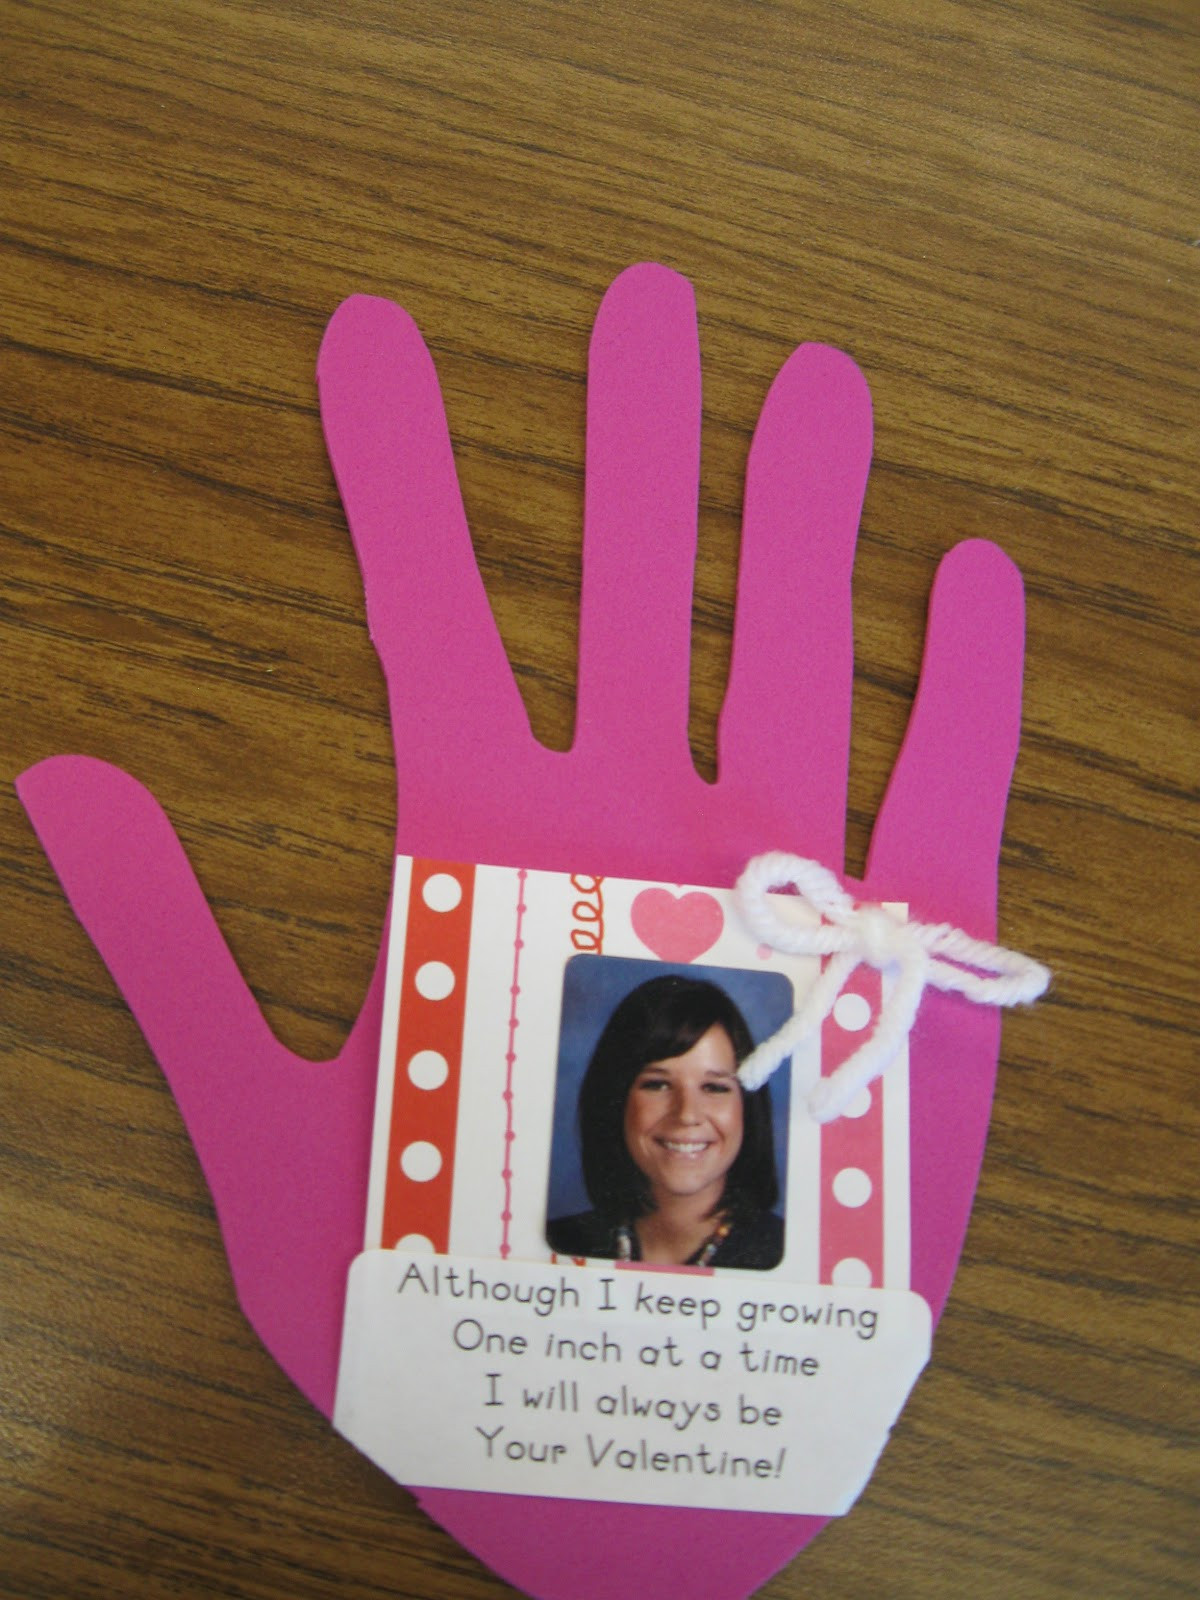 Valentine Crafts For Preschoolers To Make
 What the Teacher Wants Valentine s Day Parent Gifts